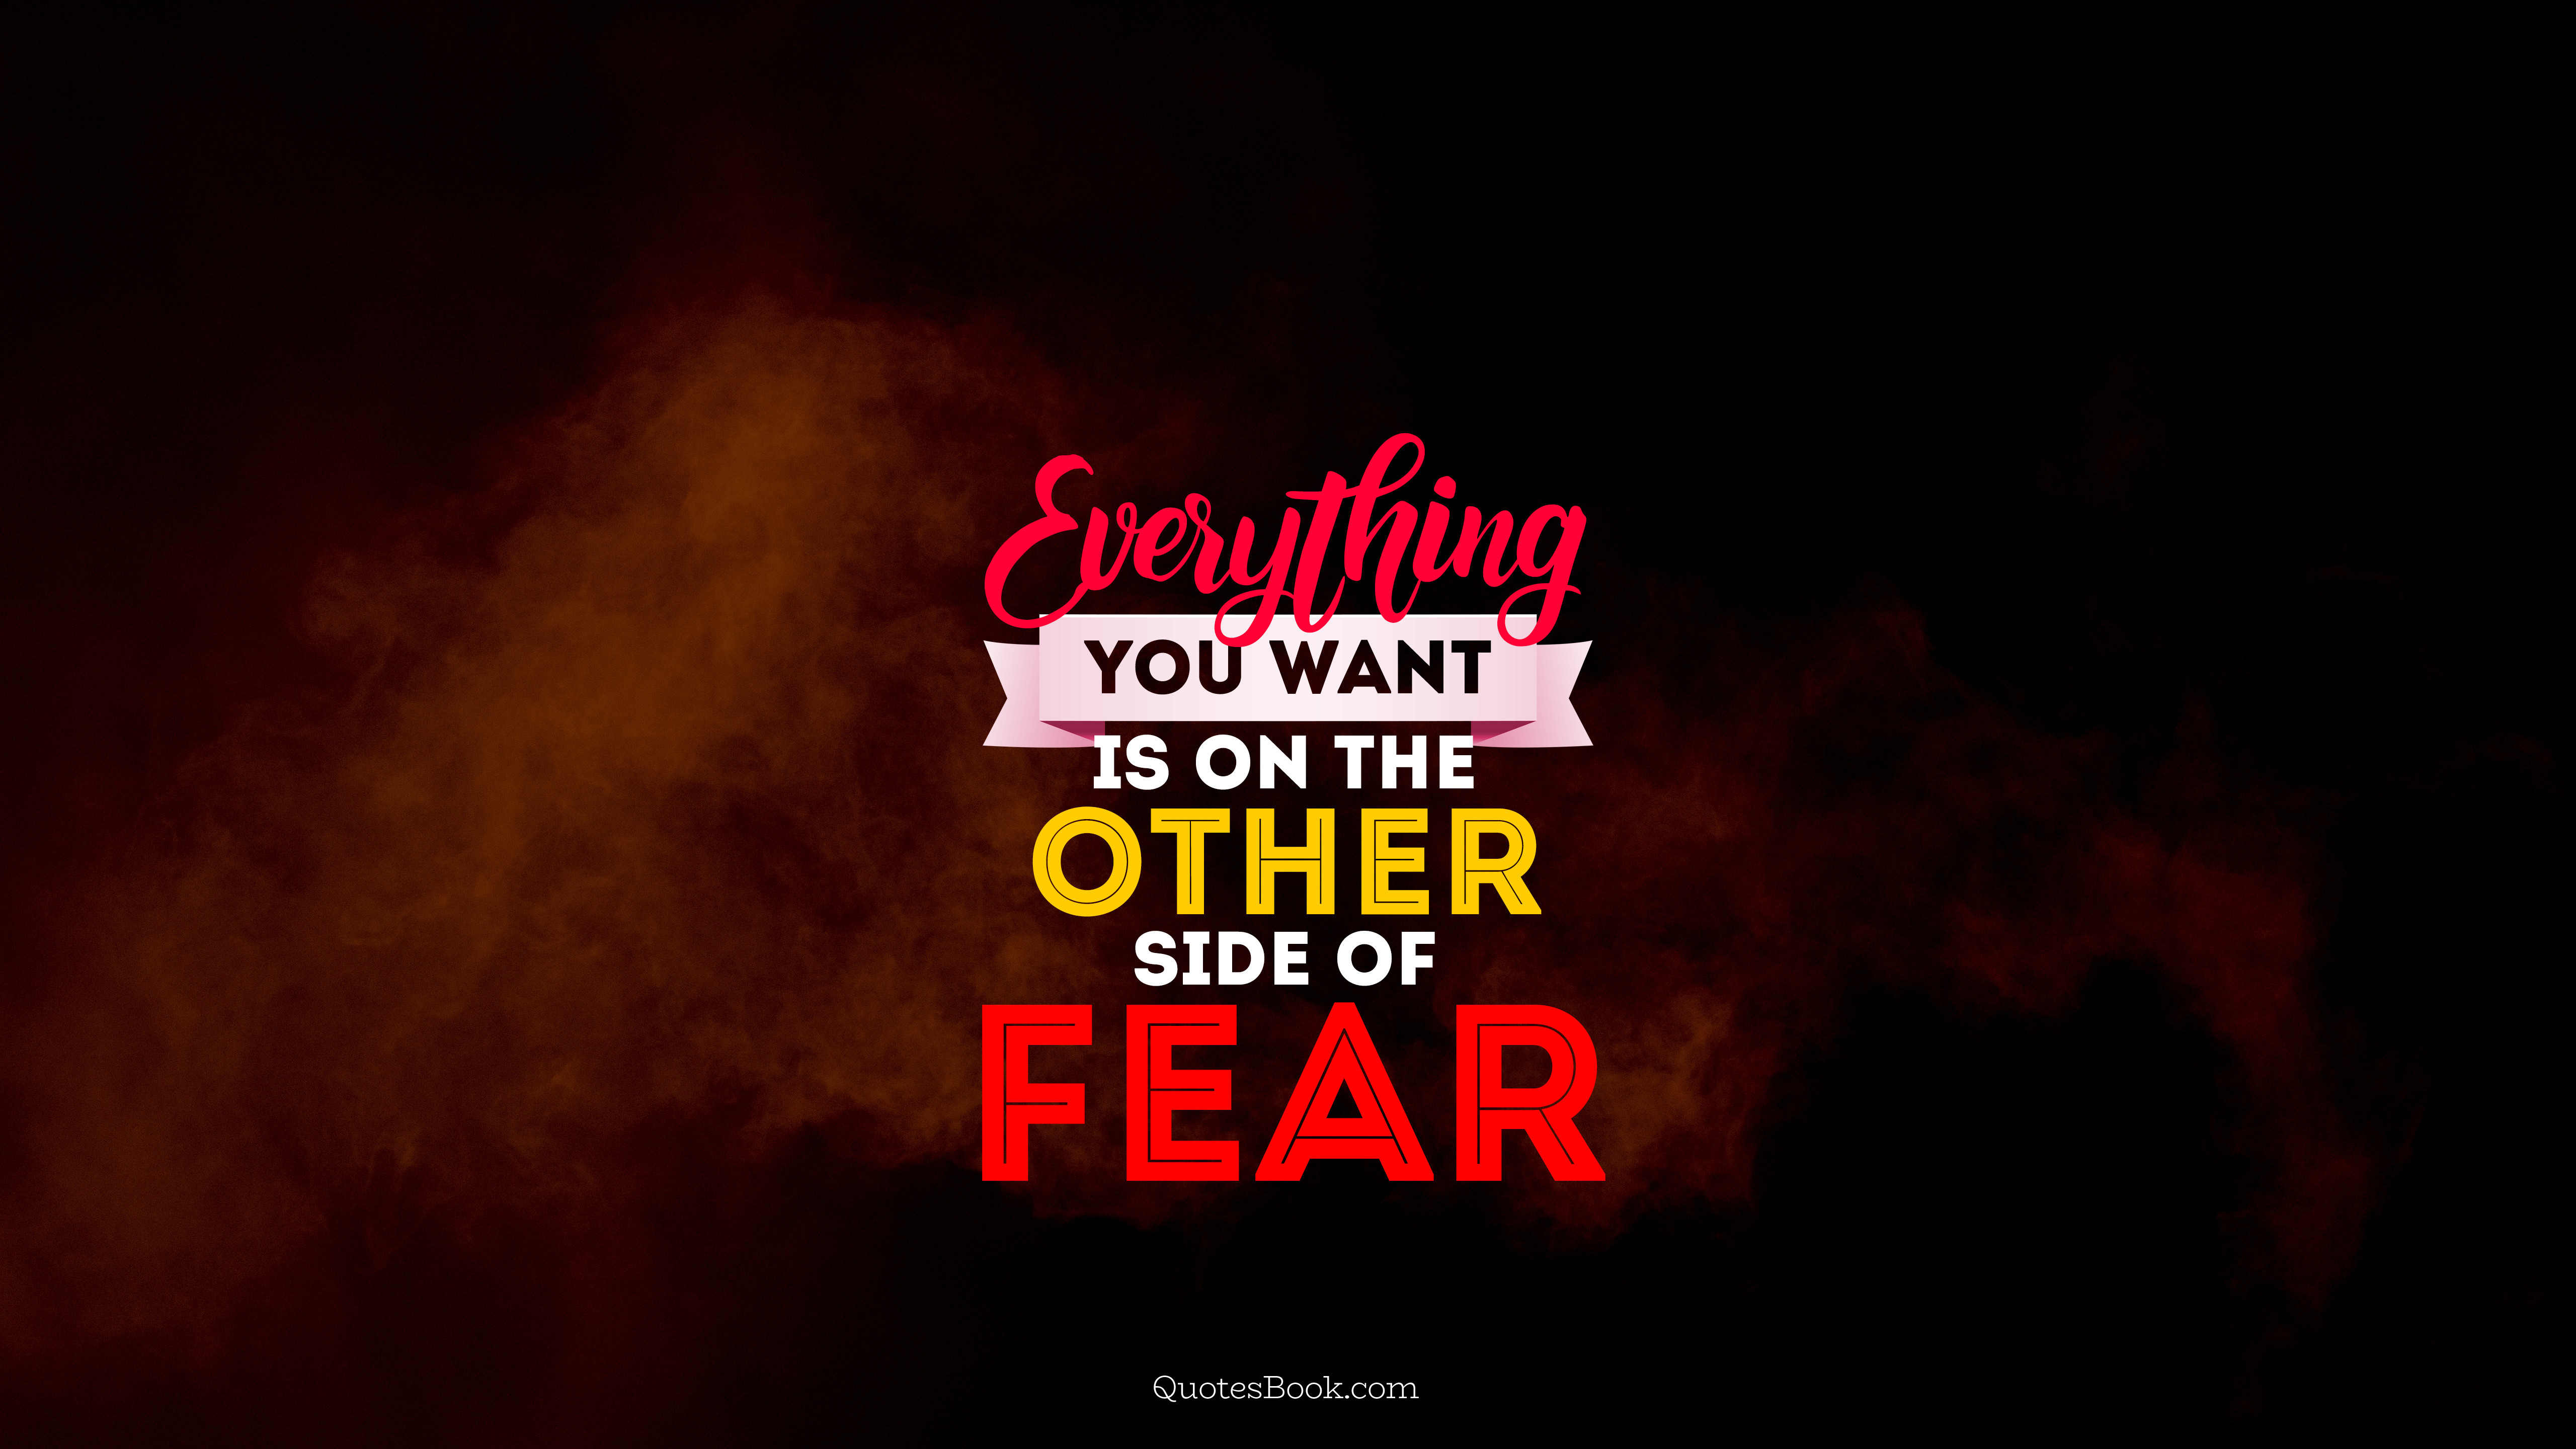 Everything you want is on the other side of fear - QuotesBook